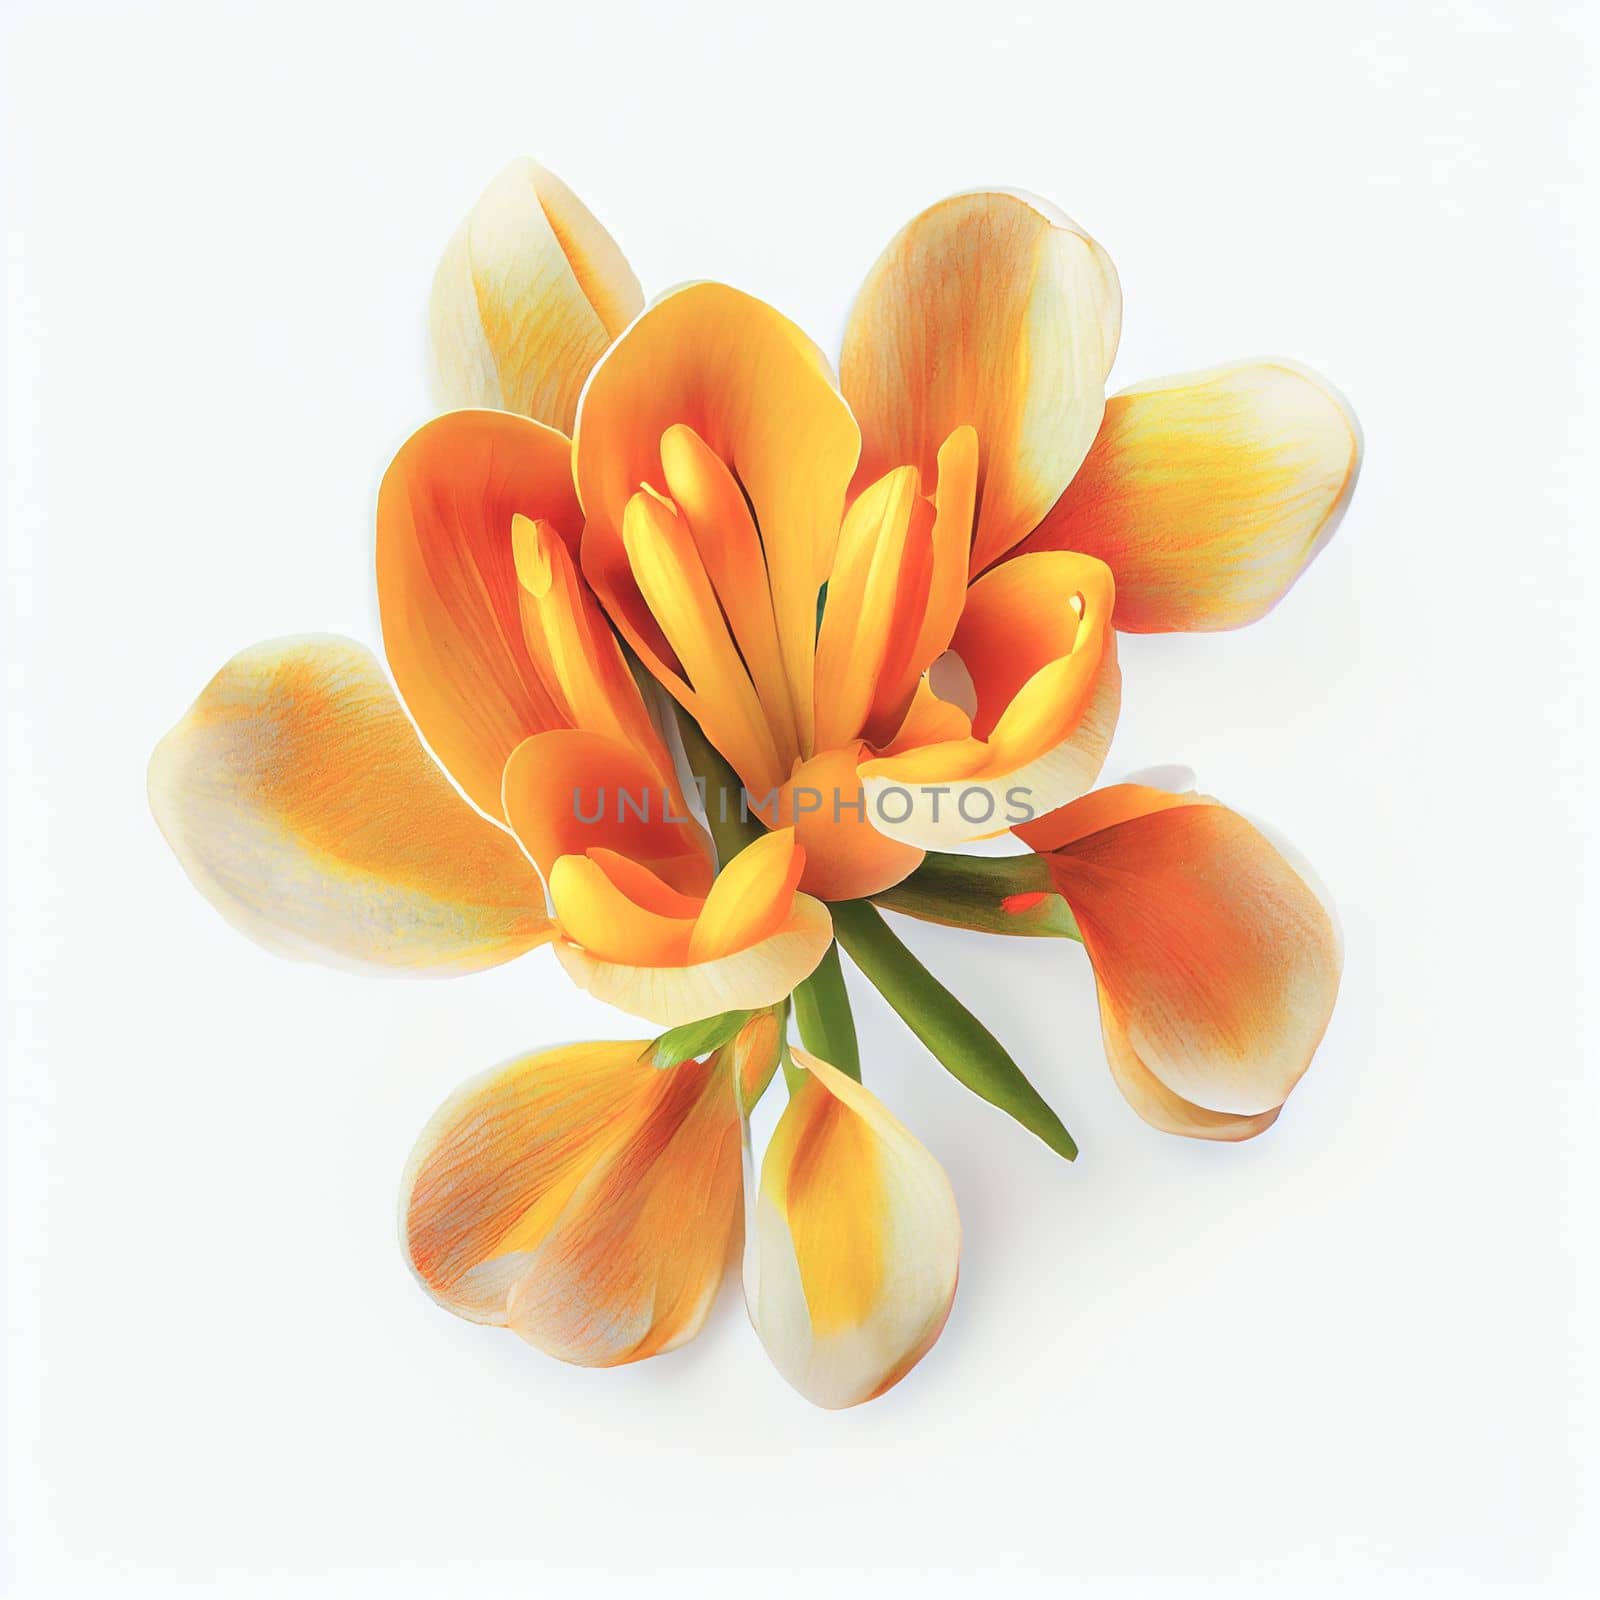 Top view a Freesia flower isolated on a white background, suitable for use on Valentine's Day cards, love letters, or springtime designs.